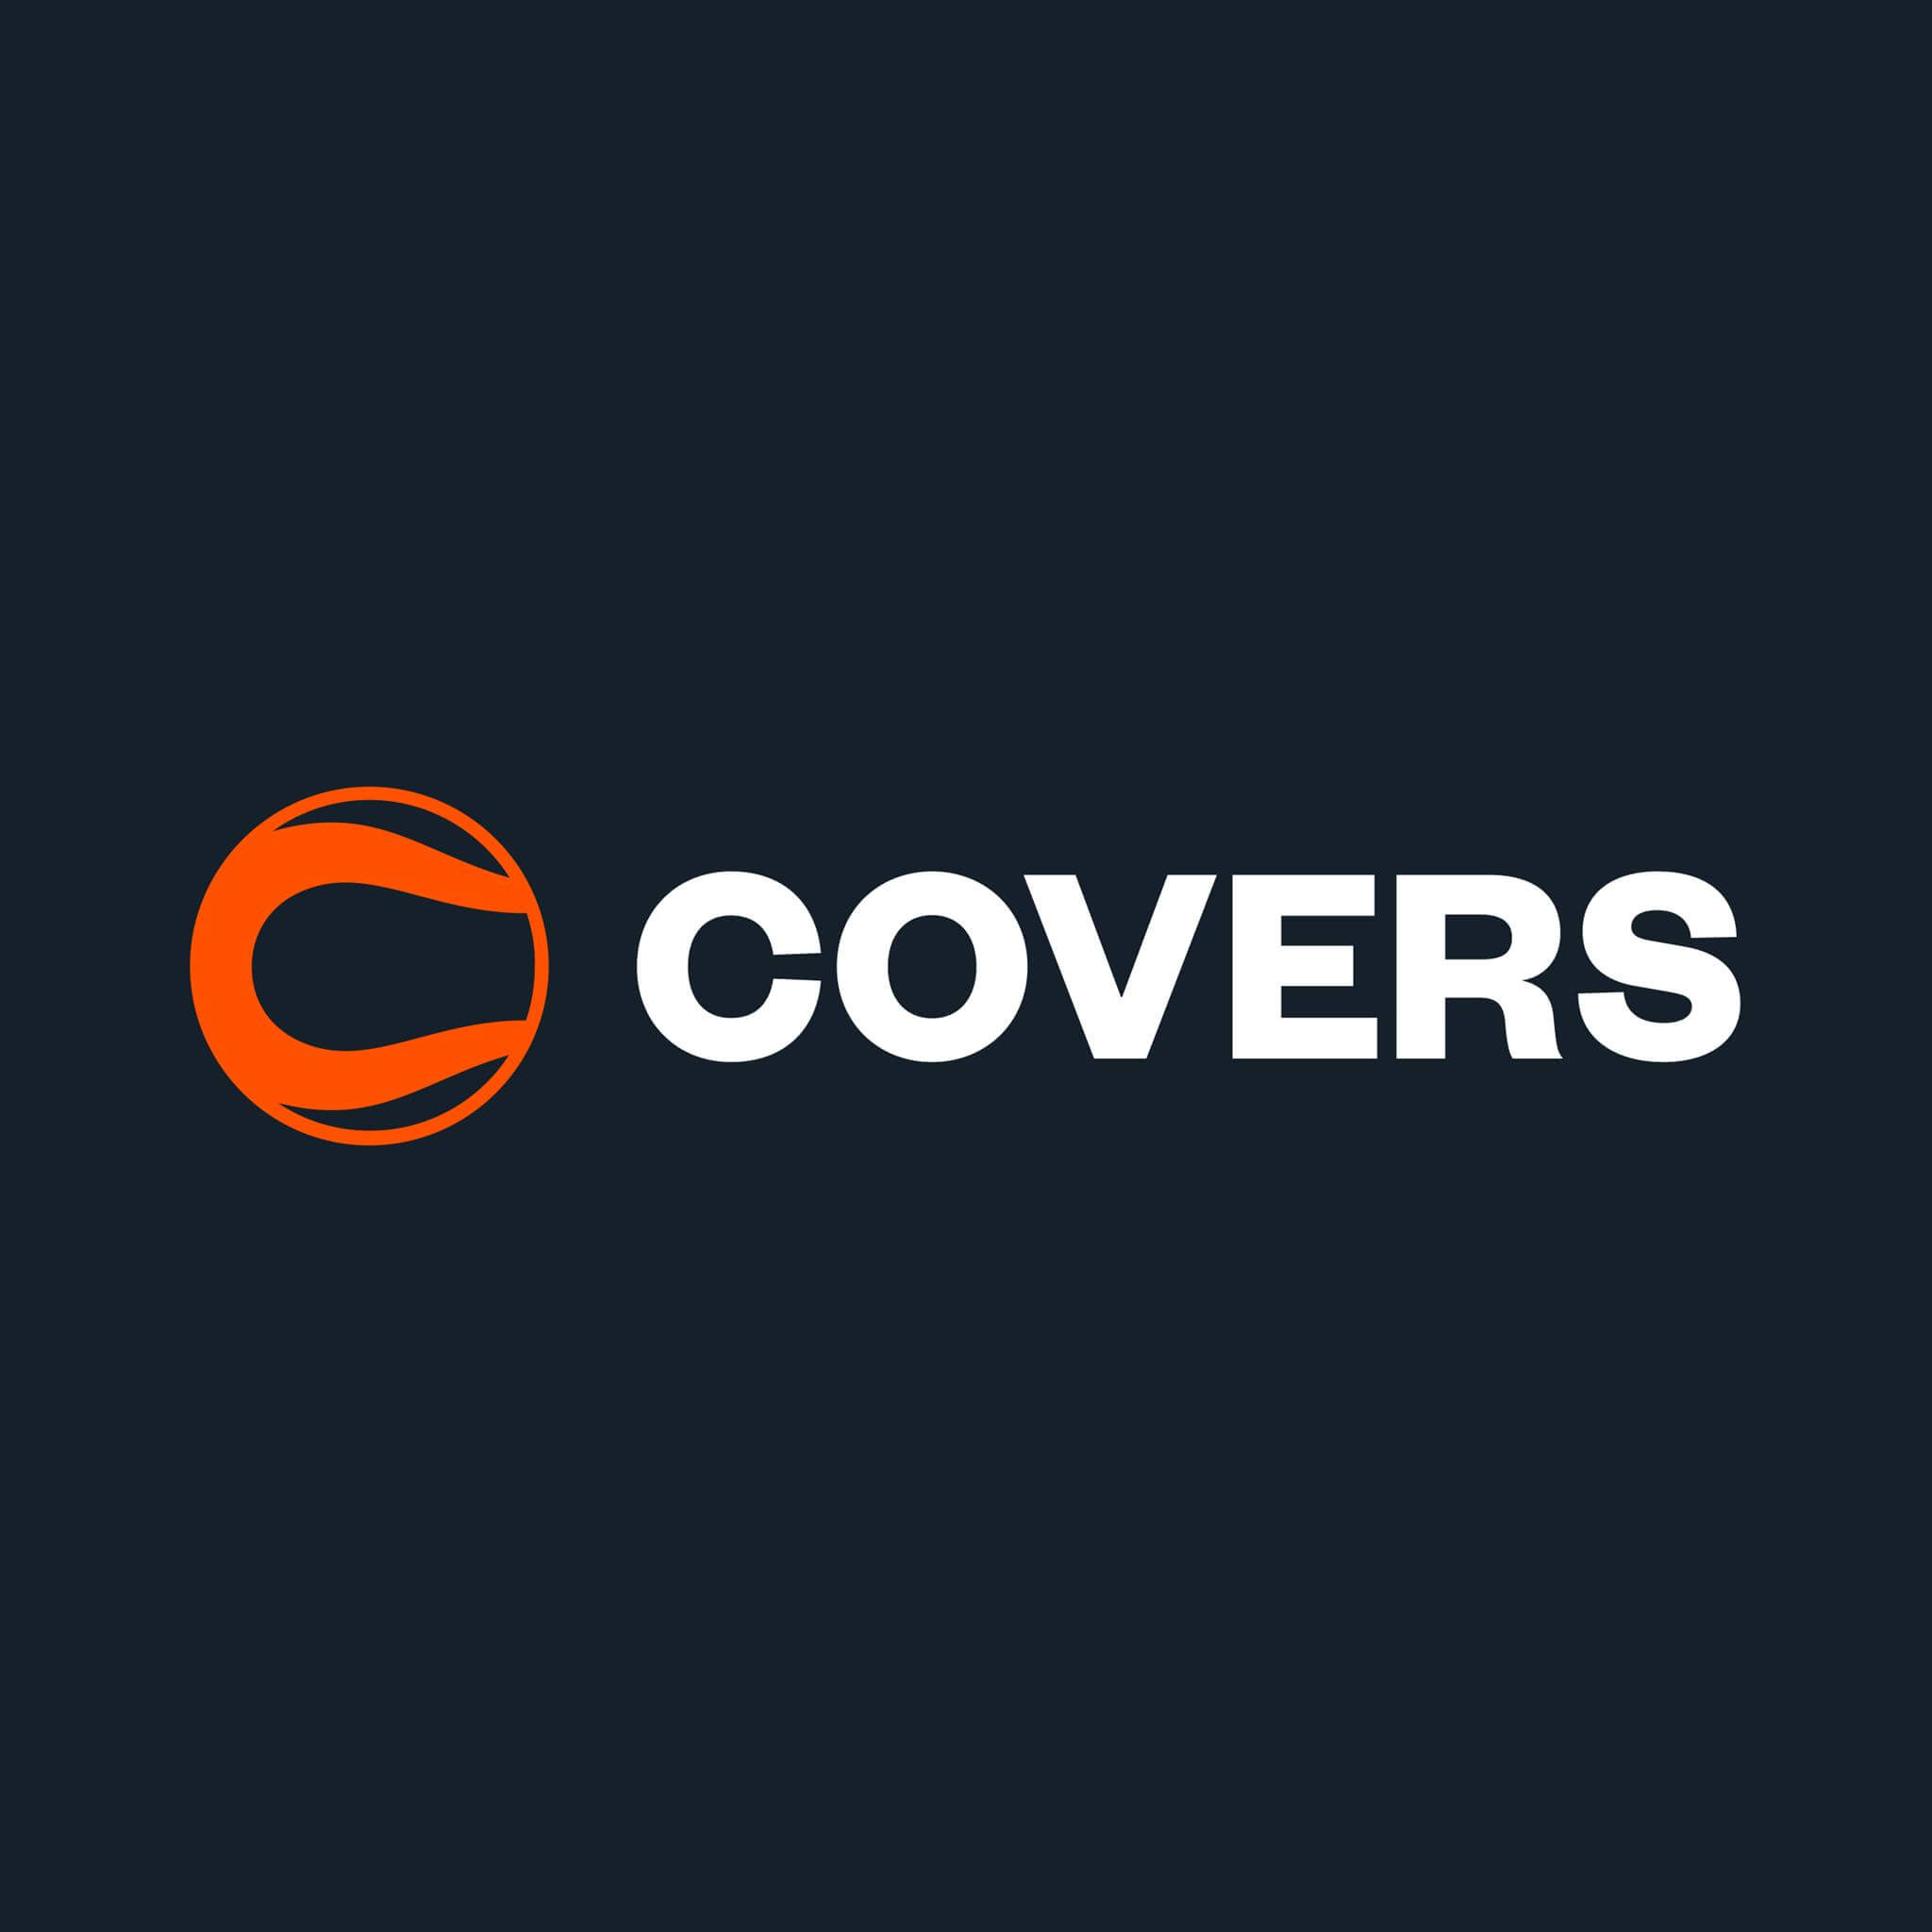 Covers betting odds betting injuries in nfl